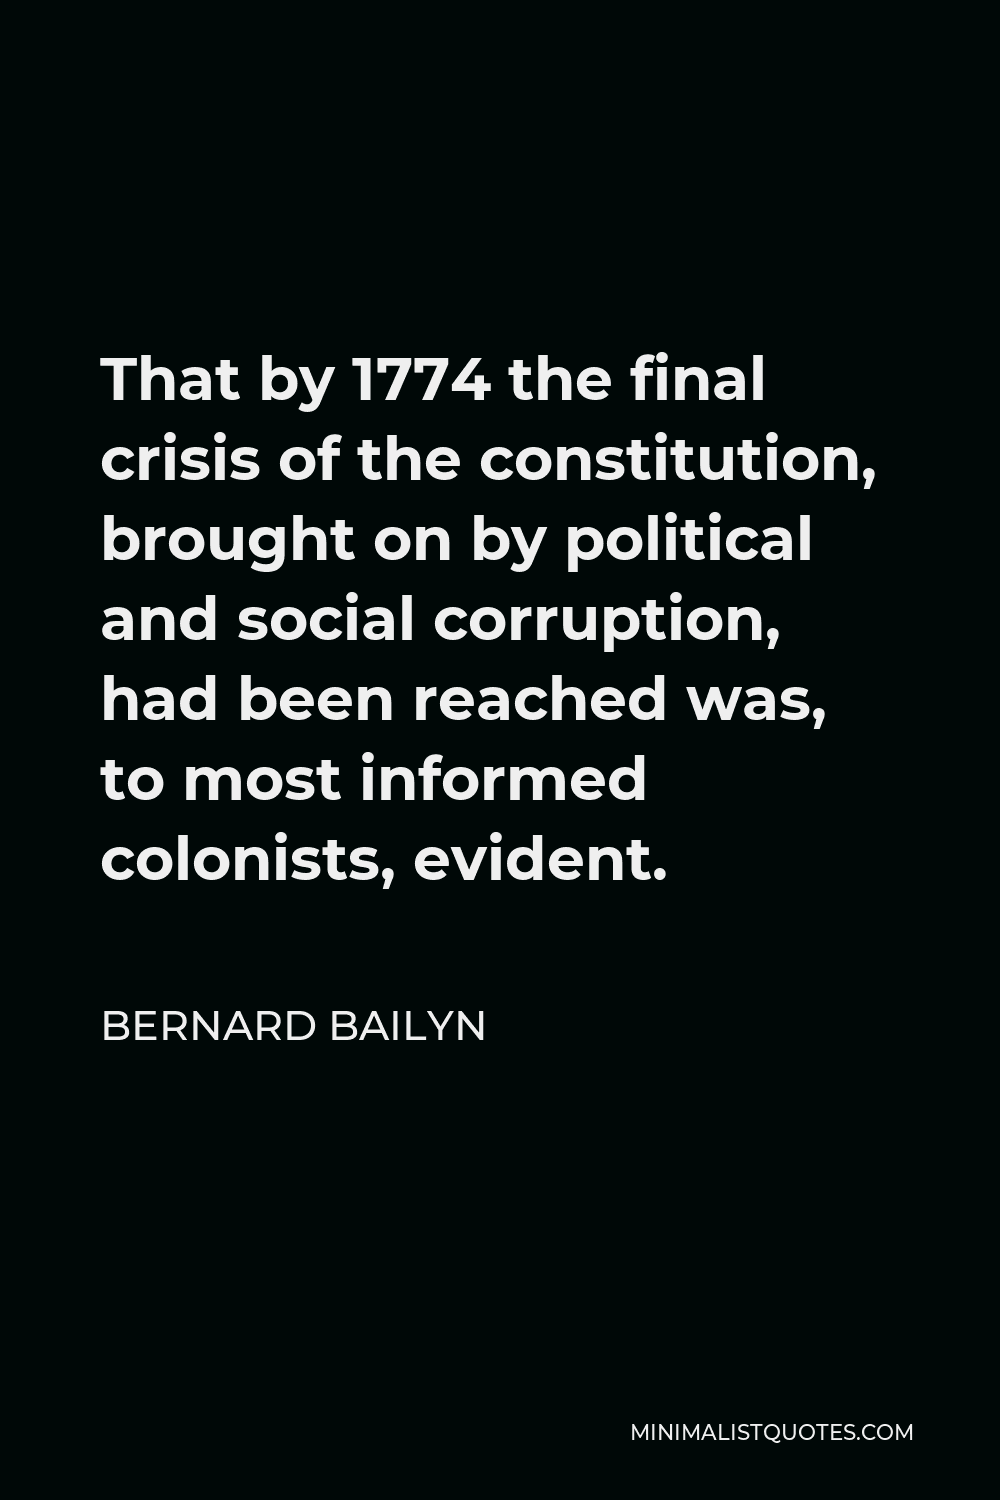 Bernard Bailyn Quote - That by 1774 the final crisis of the constitution, brought on by political and social corruption, had been reached was, to most informed colonists, evident.